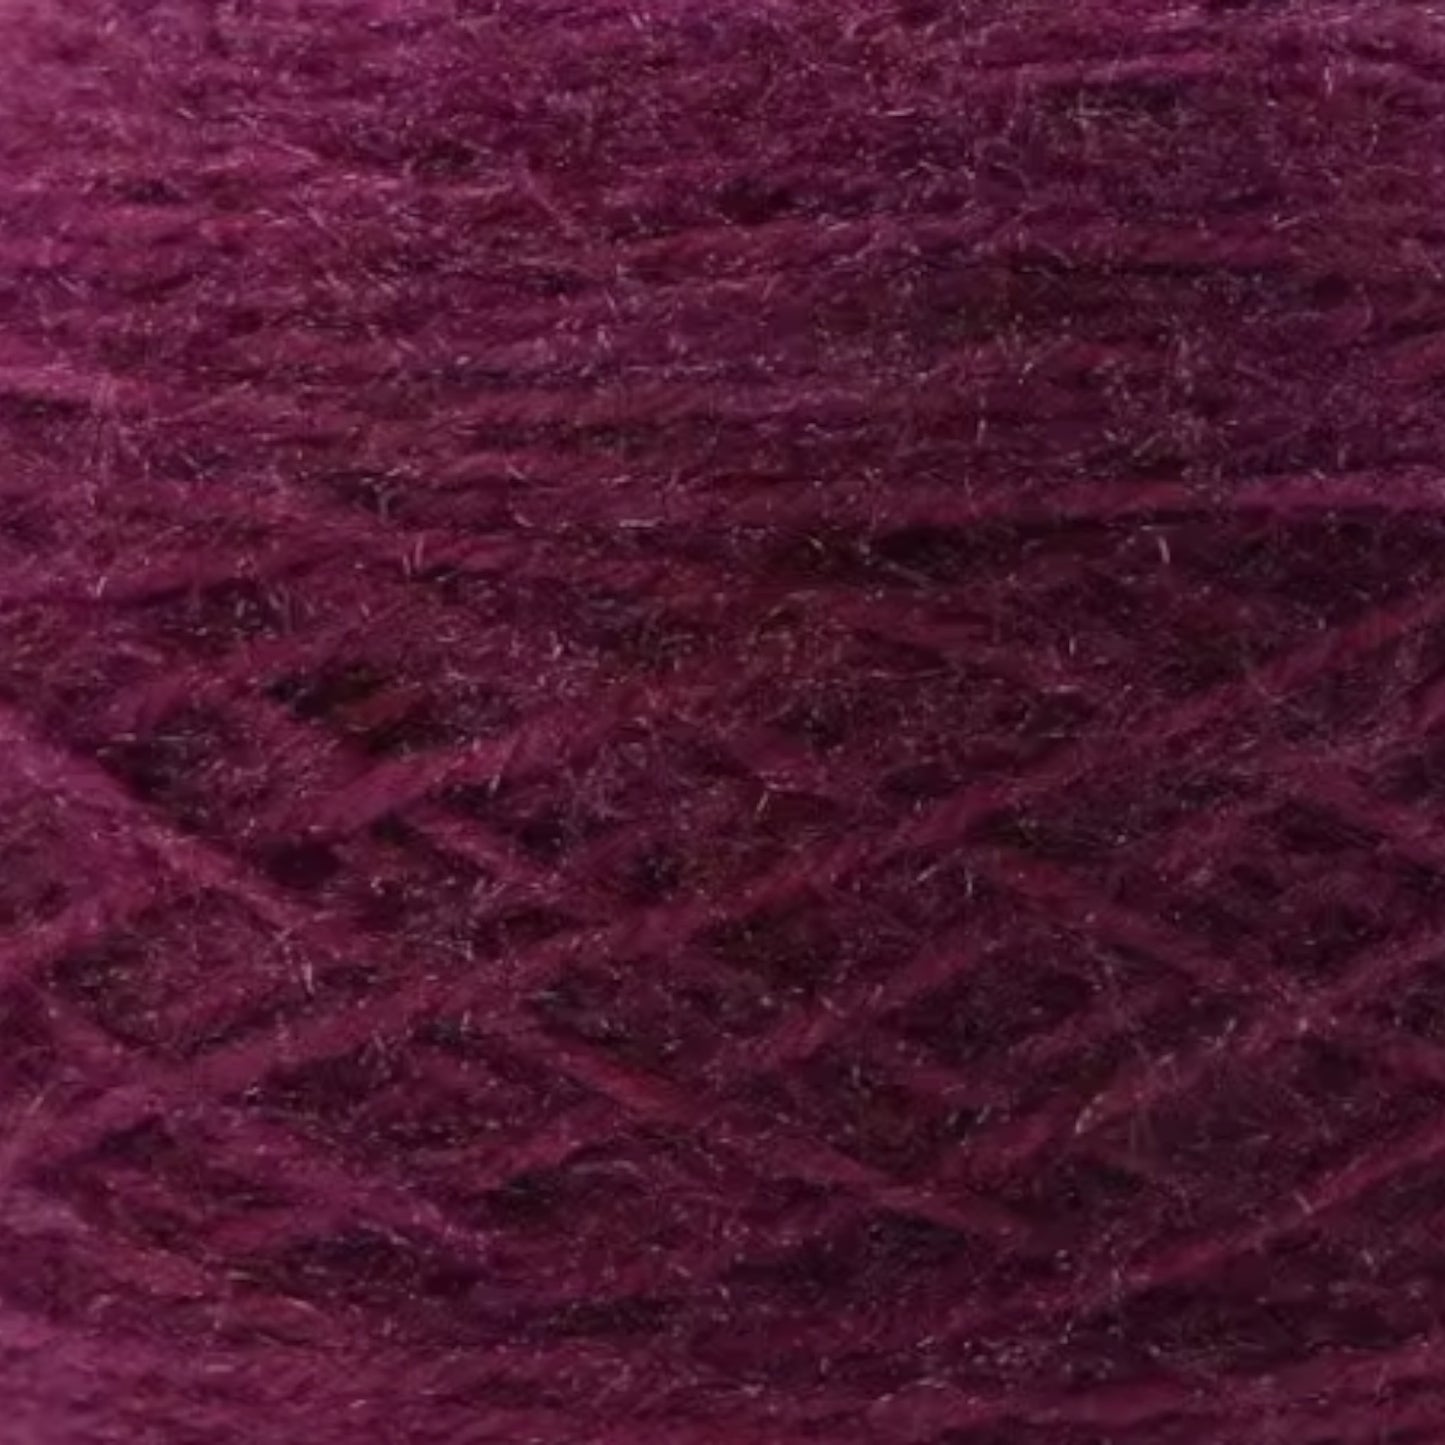 Stitch & Spool Solid Fuzz Fine Polyester Yarn - 100% Polyester, 150g/410yd Skeins in 7 Solid Colors